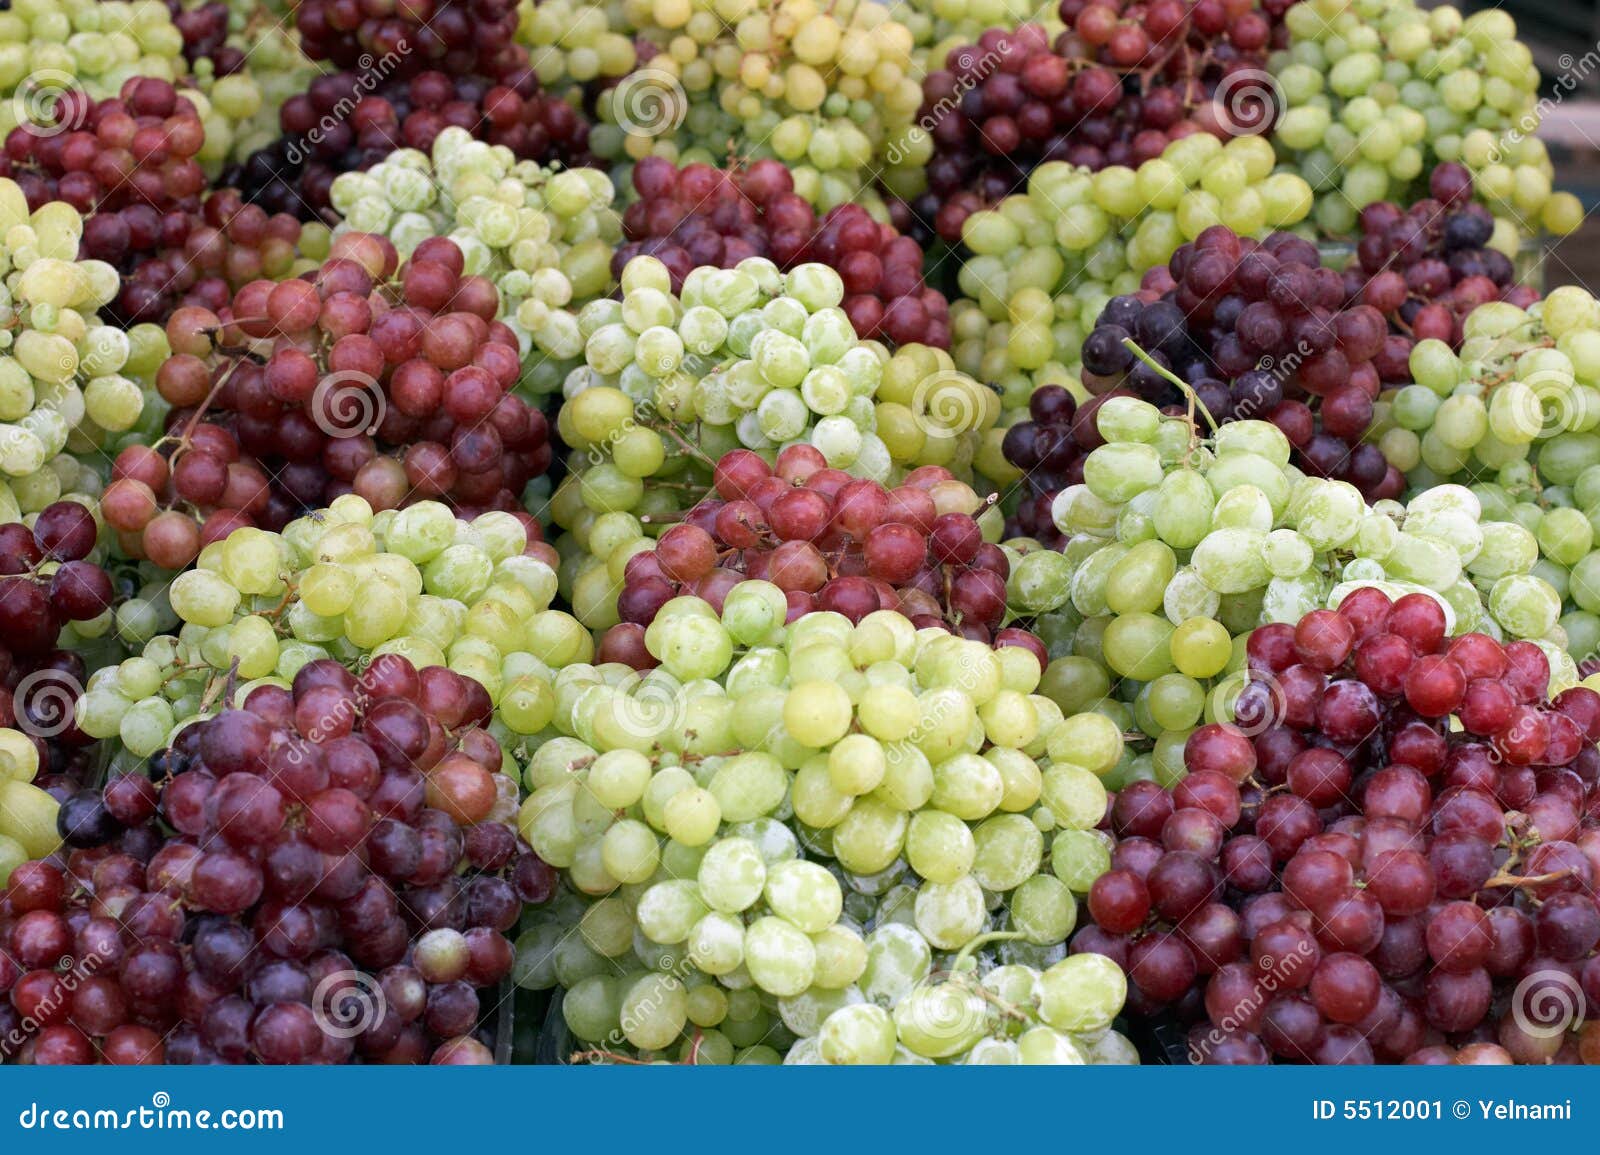 Organic Green Grapes in a Market Stock Image - Image of health